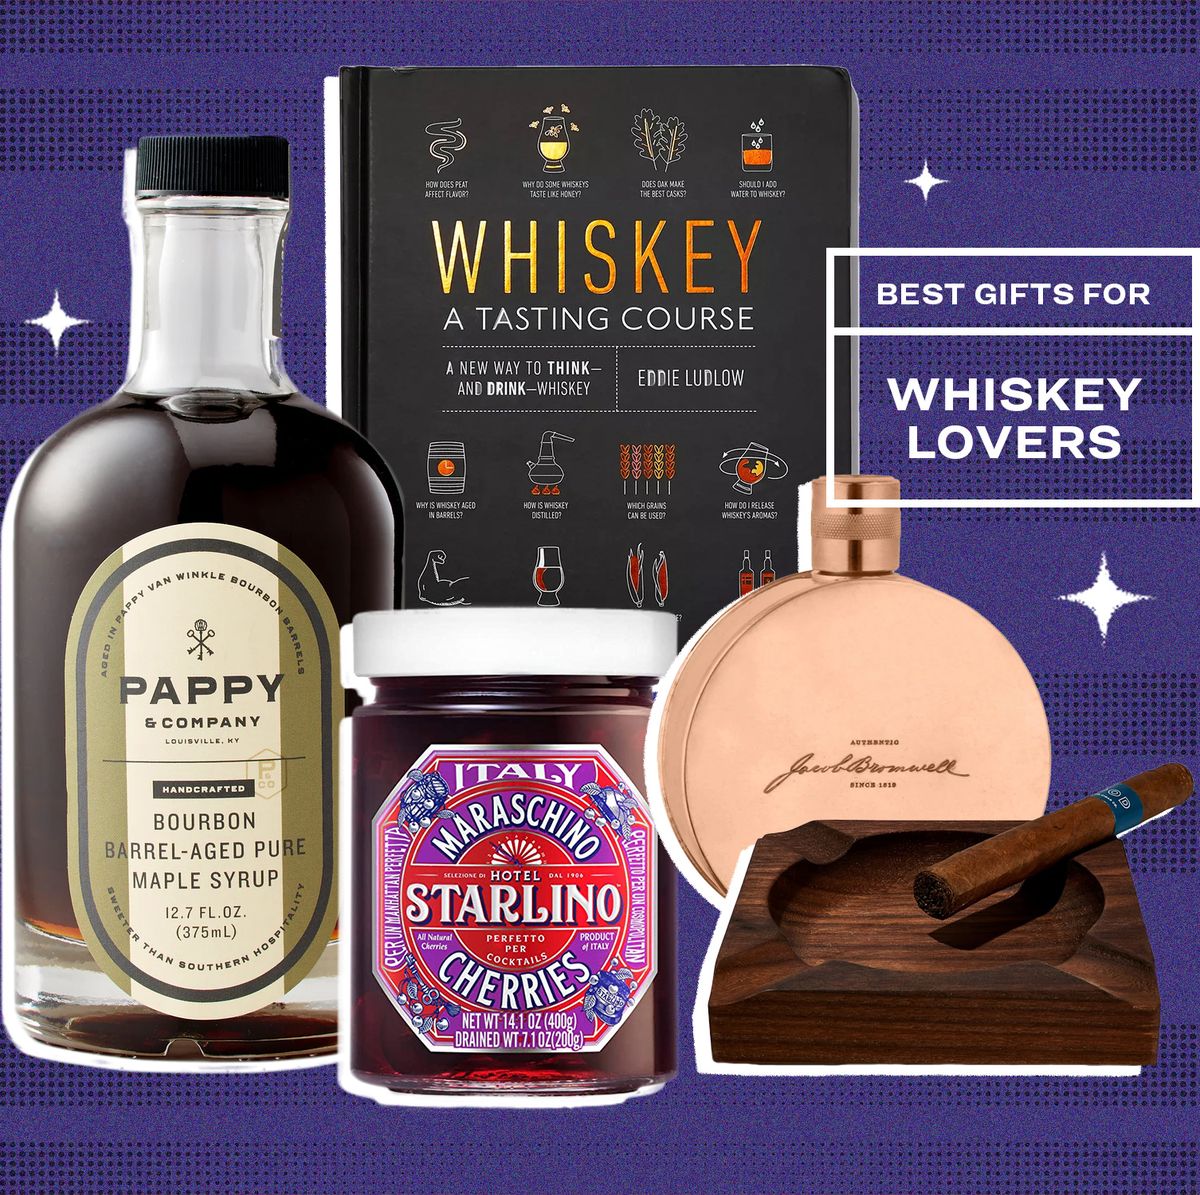 https://hips.hearstapps.com/hmg-prod.s3.amazonaws.com/images/con-22-043-web-gift-guide-whiskey-lovers-refresh-1668811706.jpg?crop=0.502xw:1.00xh;0.250xw,0&resize=1200:*